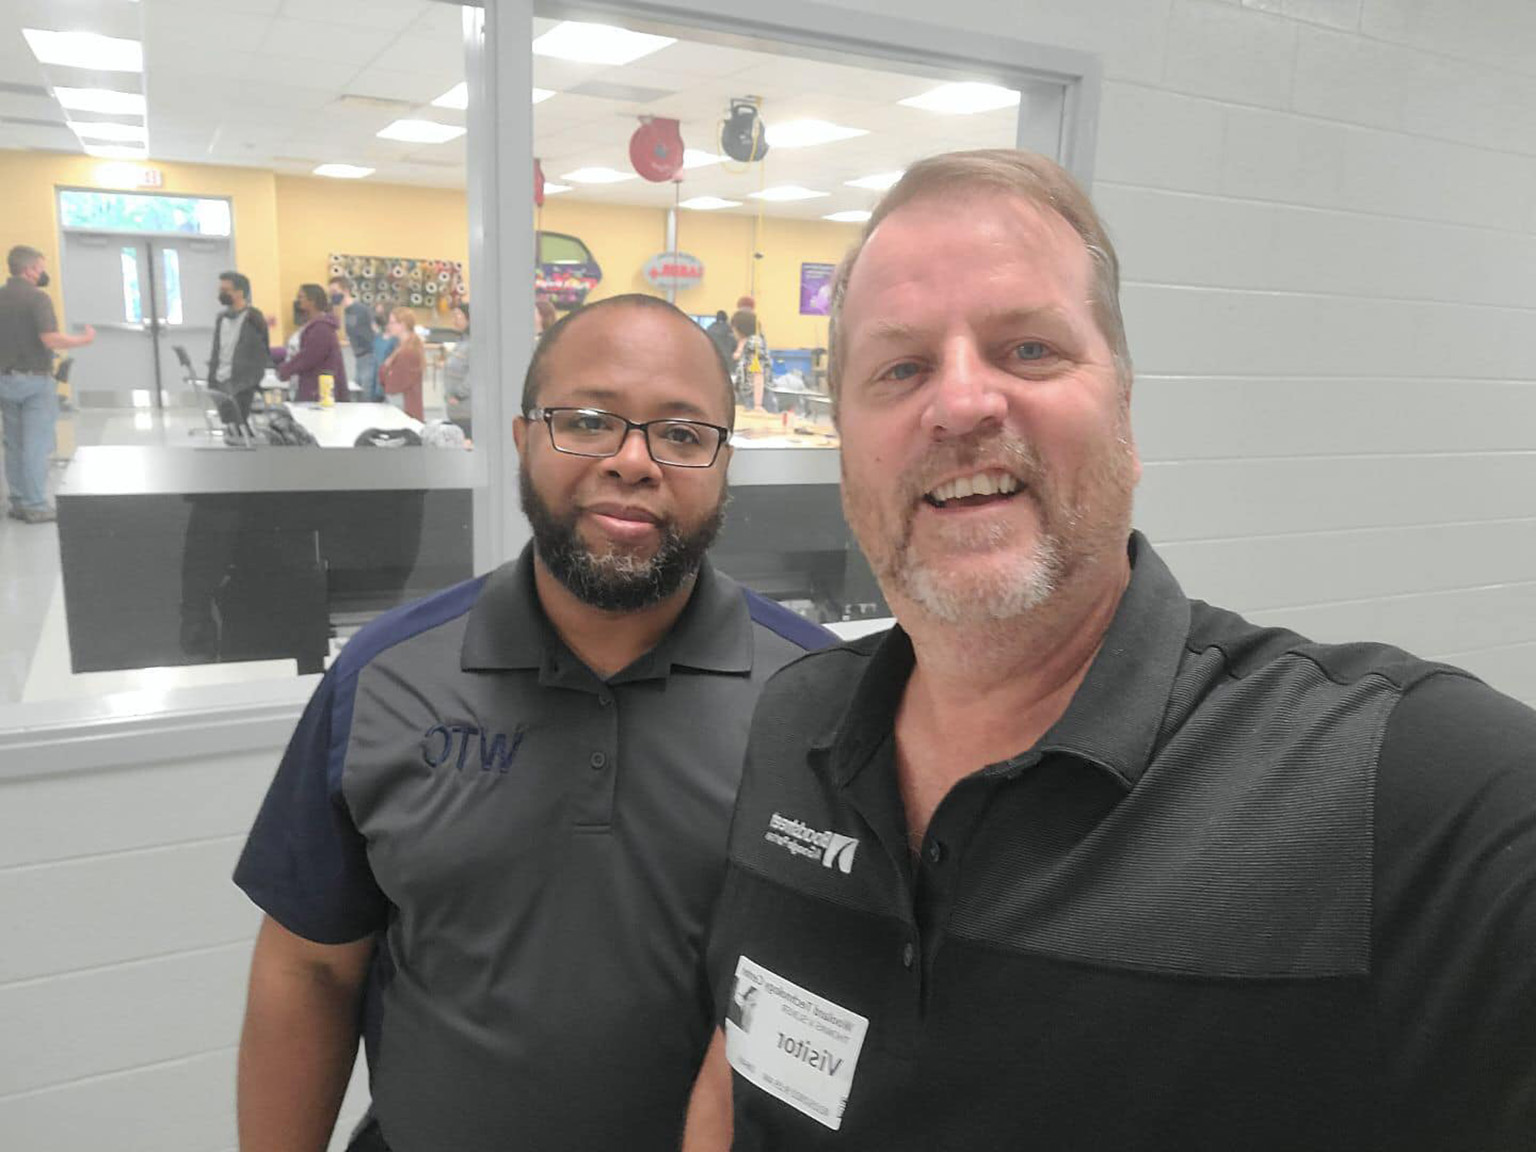 Broadstreet.net founder & CEO, Tom Sliker, at Woolard Technology Center with LaKeith Bufford